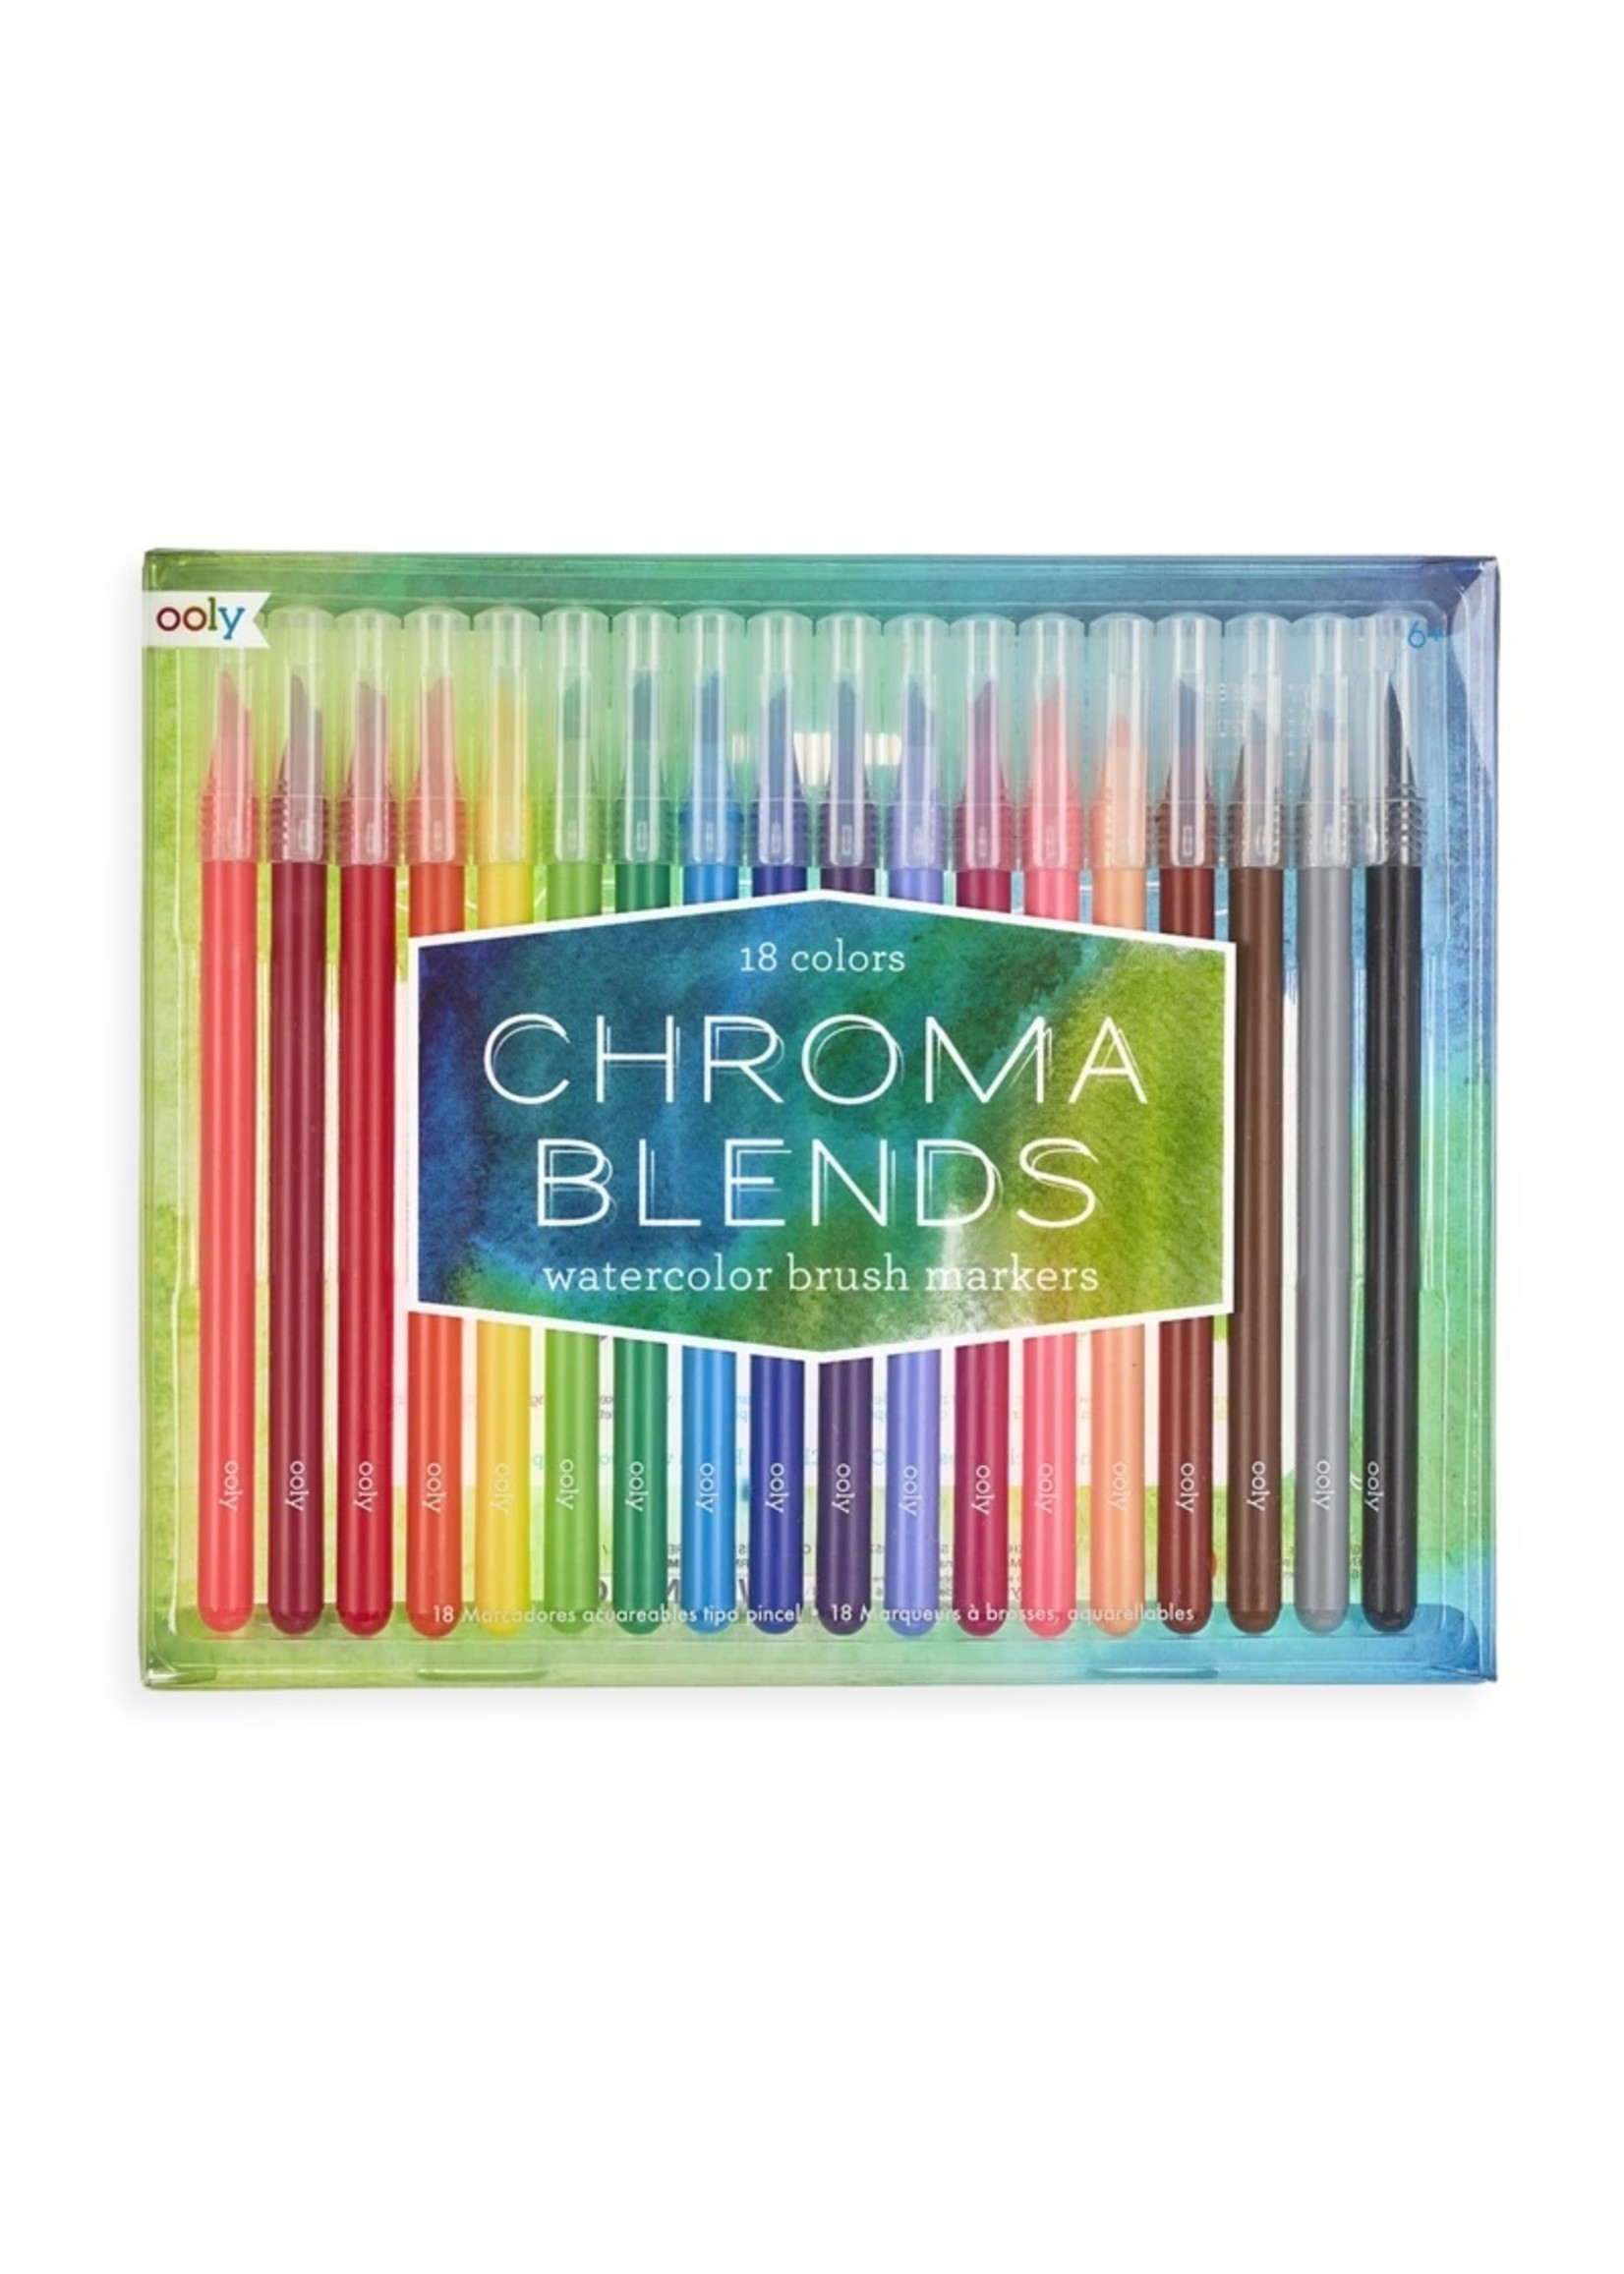 Ooly - Chroma Blends Watercolor Brush Markers - Hub Hobby